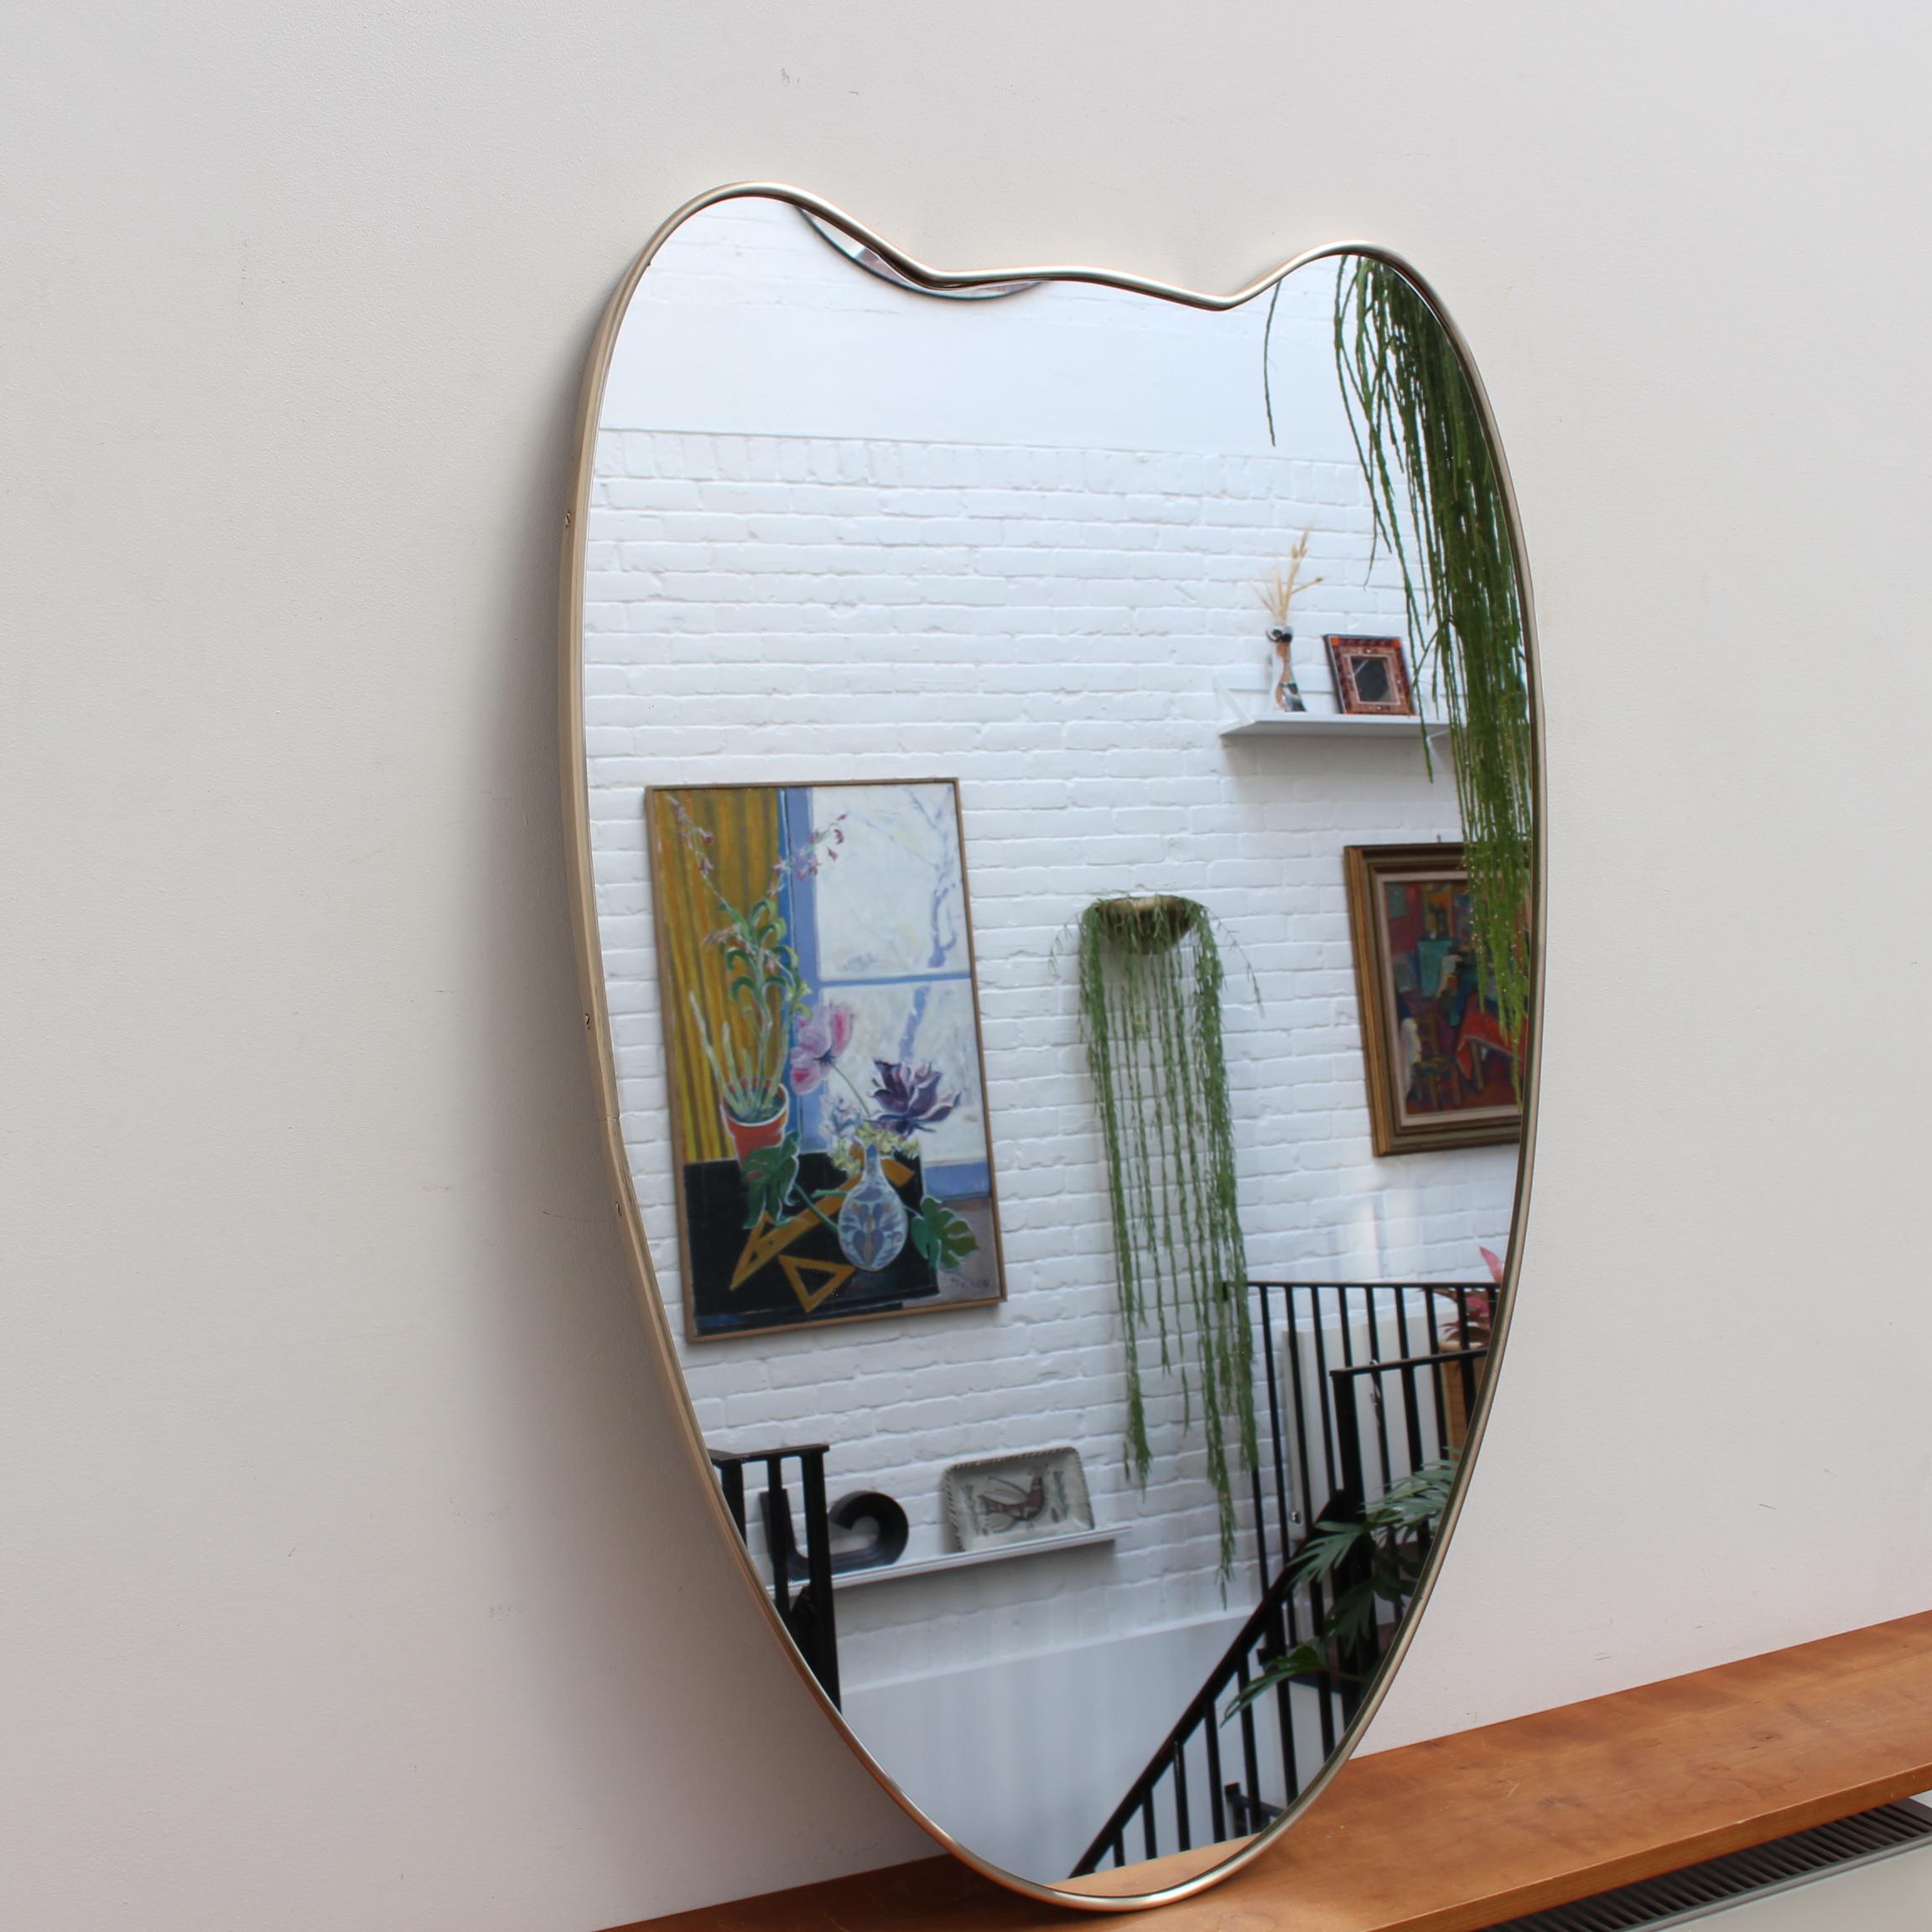 Mid-century Italian wall mirror with brass frame (circa 1950s). The mirror is classically-shaped and distinctive in a Modern style. It is in very good overall condition. A beautiful, aged patina will develop on the recently polished brass frame over